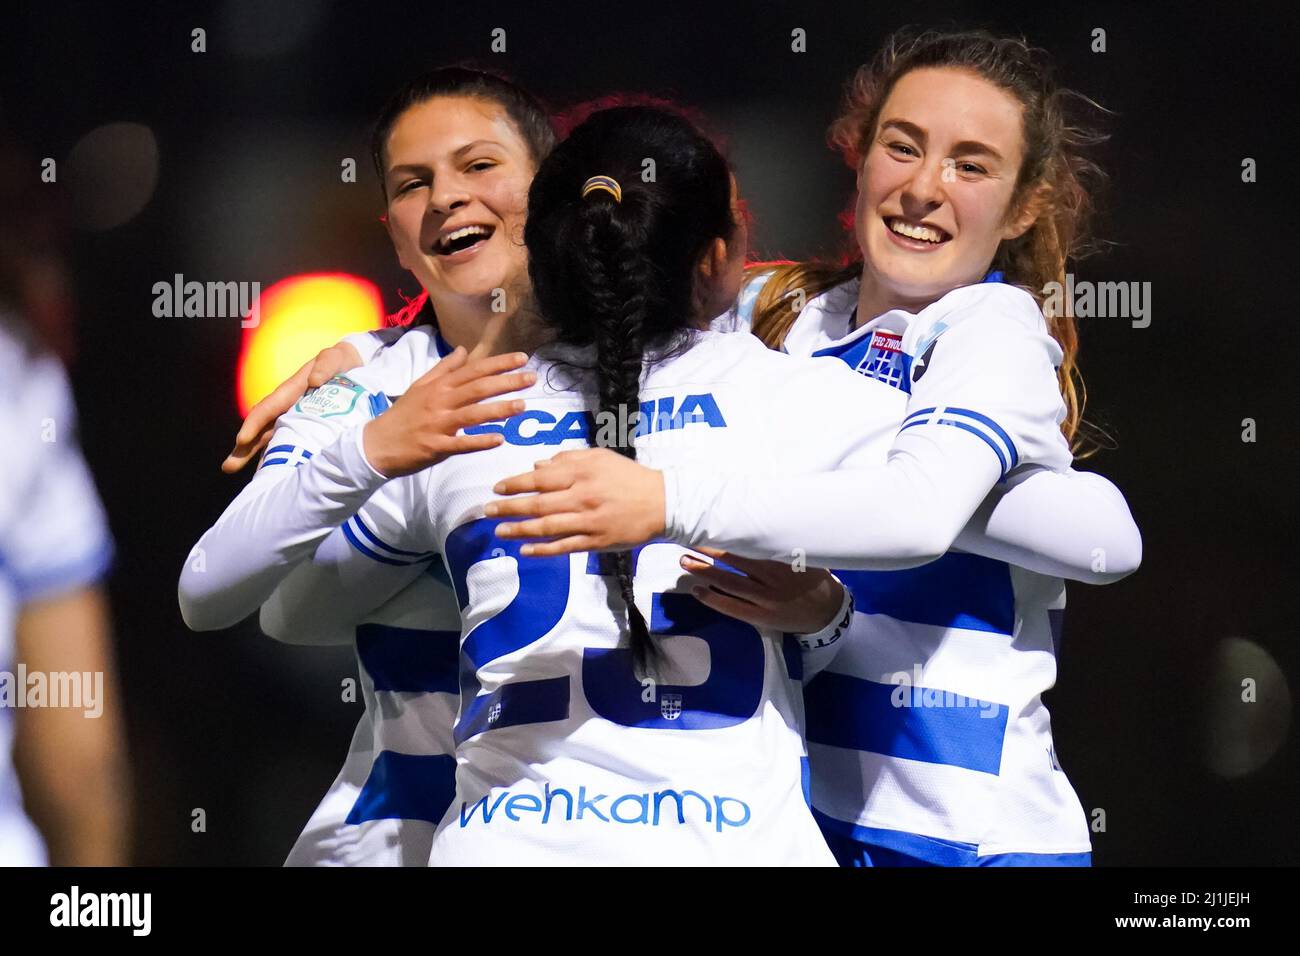 Zwolle, Netherlands. 25th Mar, 2022. ZWOLLE, NETHERLANDS - MARCH 25:  Danique Noordman of PEC Zwolle, Karlene White of PEC Zwolle and Jeva Walk  of PEC Zwolle celebrate their sides win during the